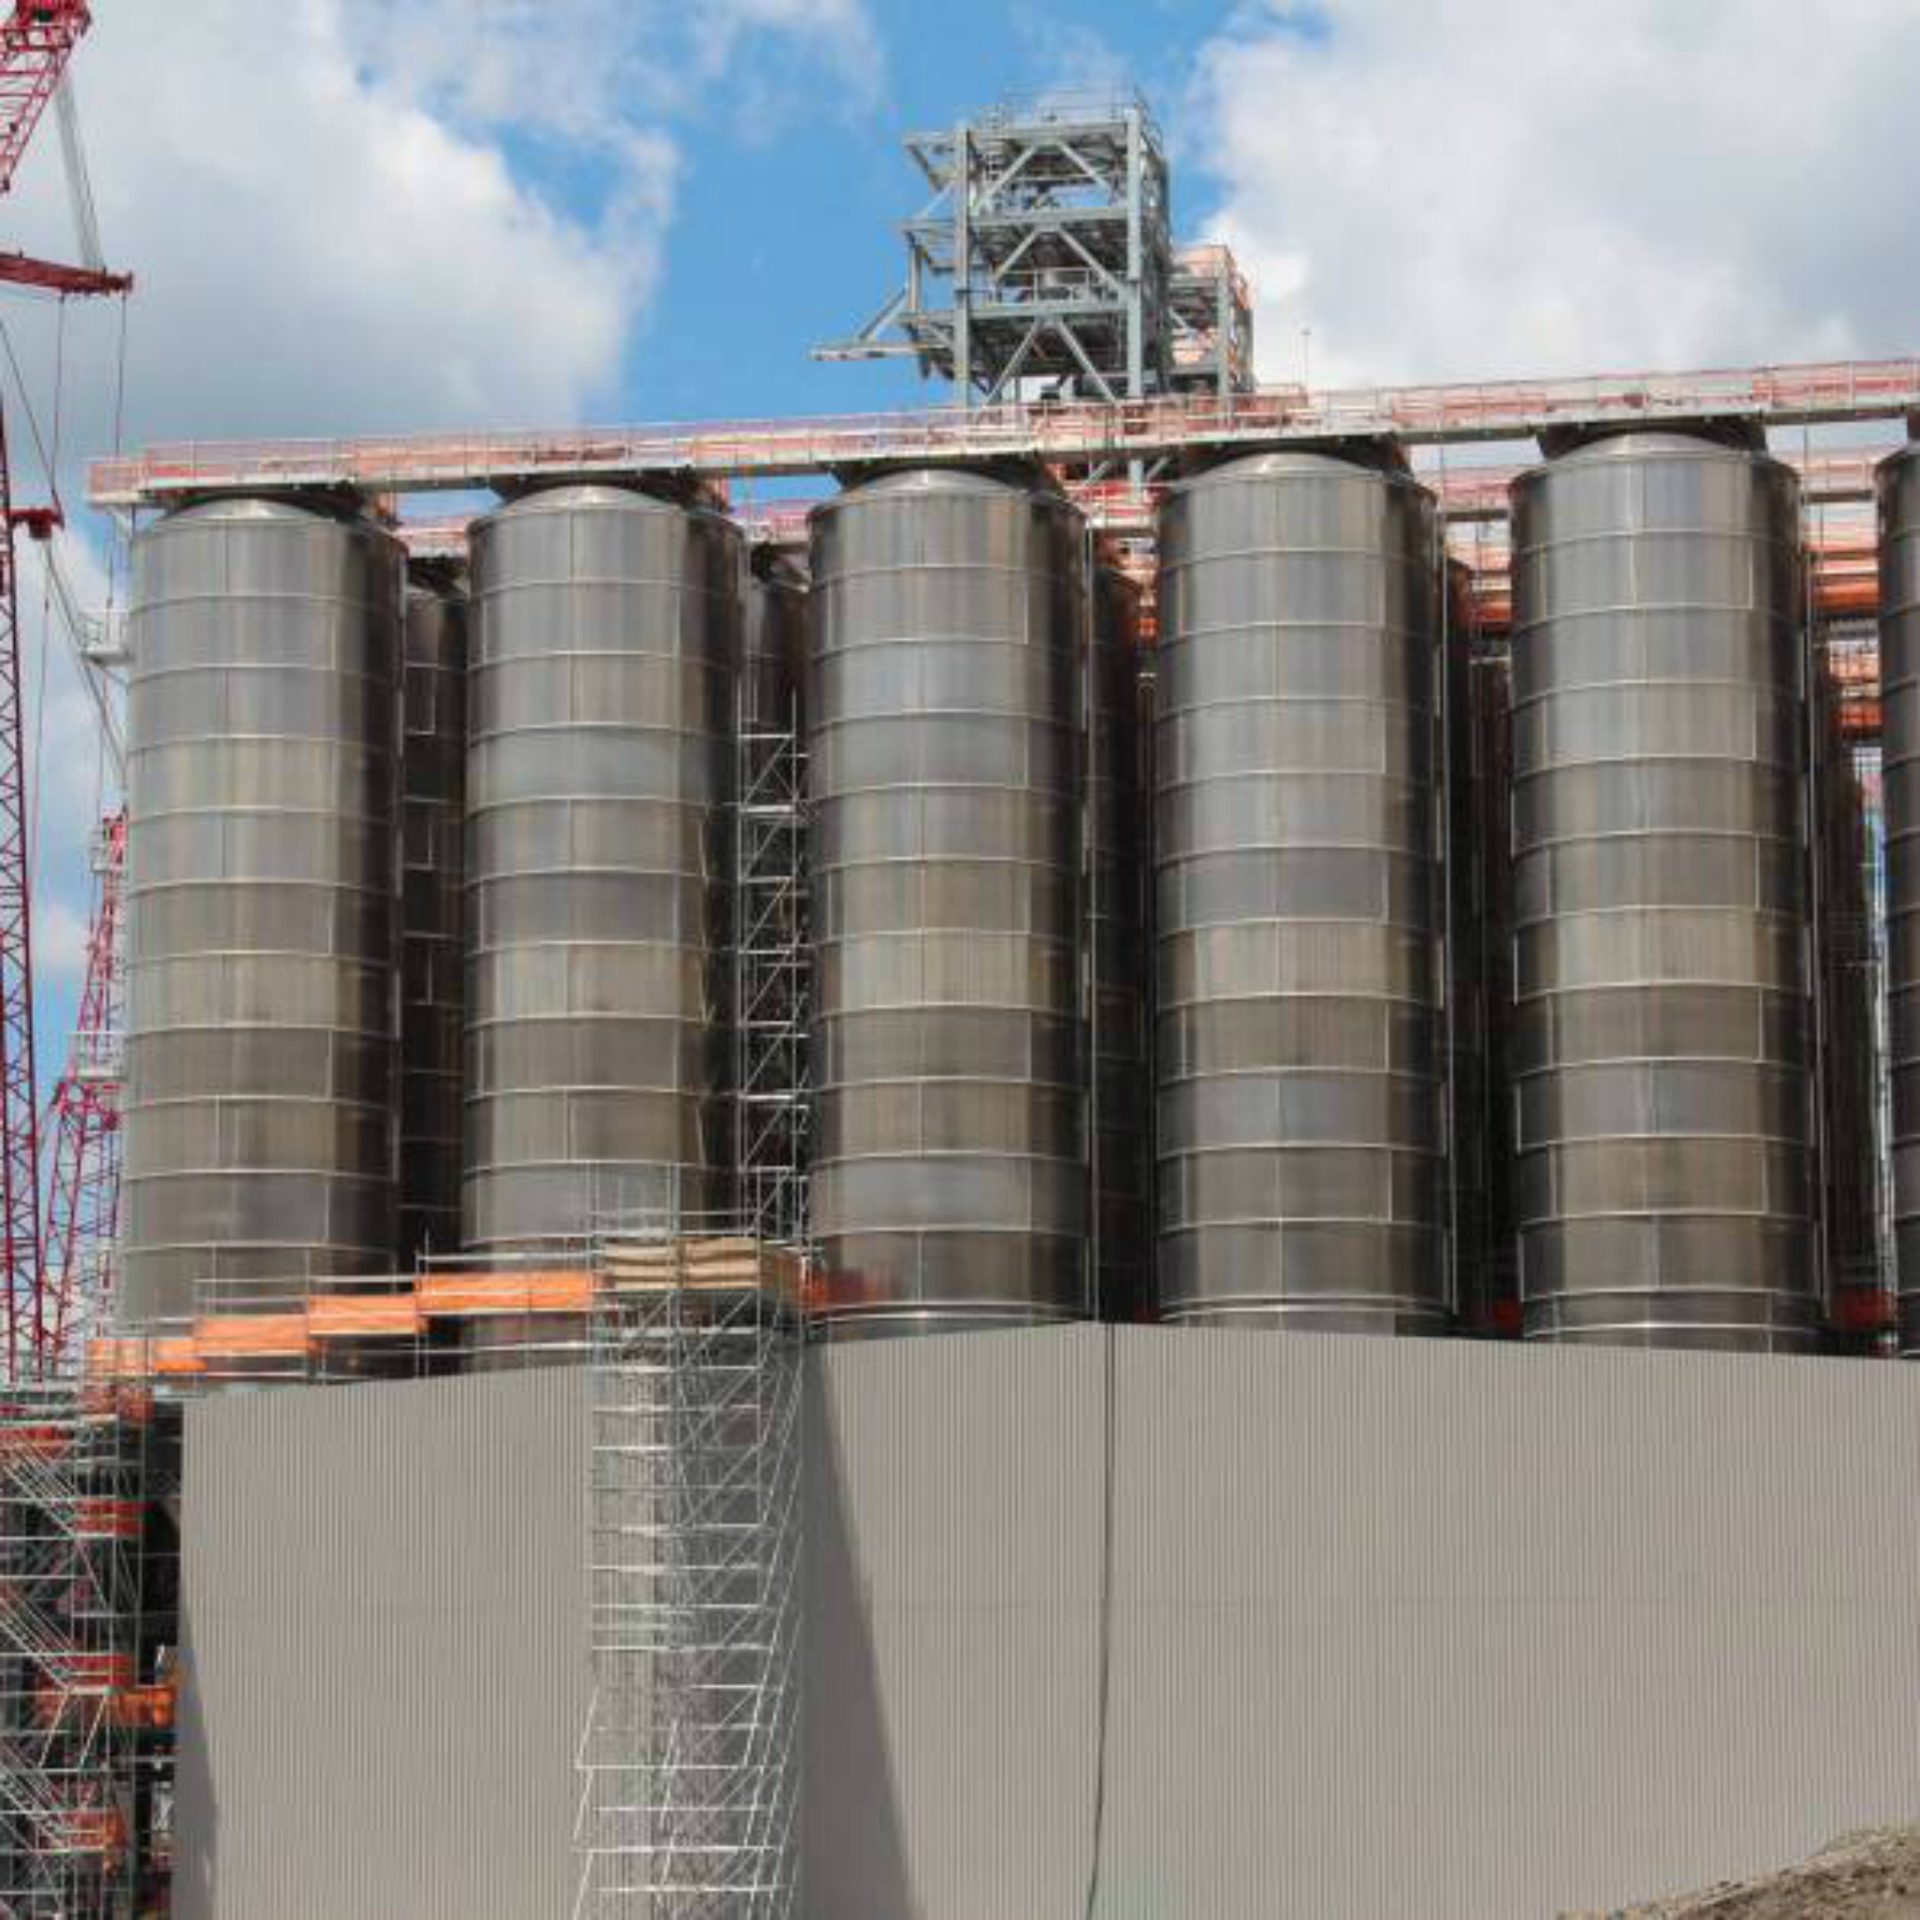 These tanks, shown here in June 2019, will hold the plastic pellets produced by Shell’s ethane cracker. According to Shell, 1.6 million metric tons of plastic will be produced there annually.